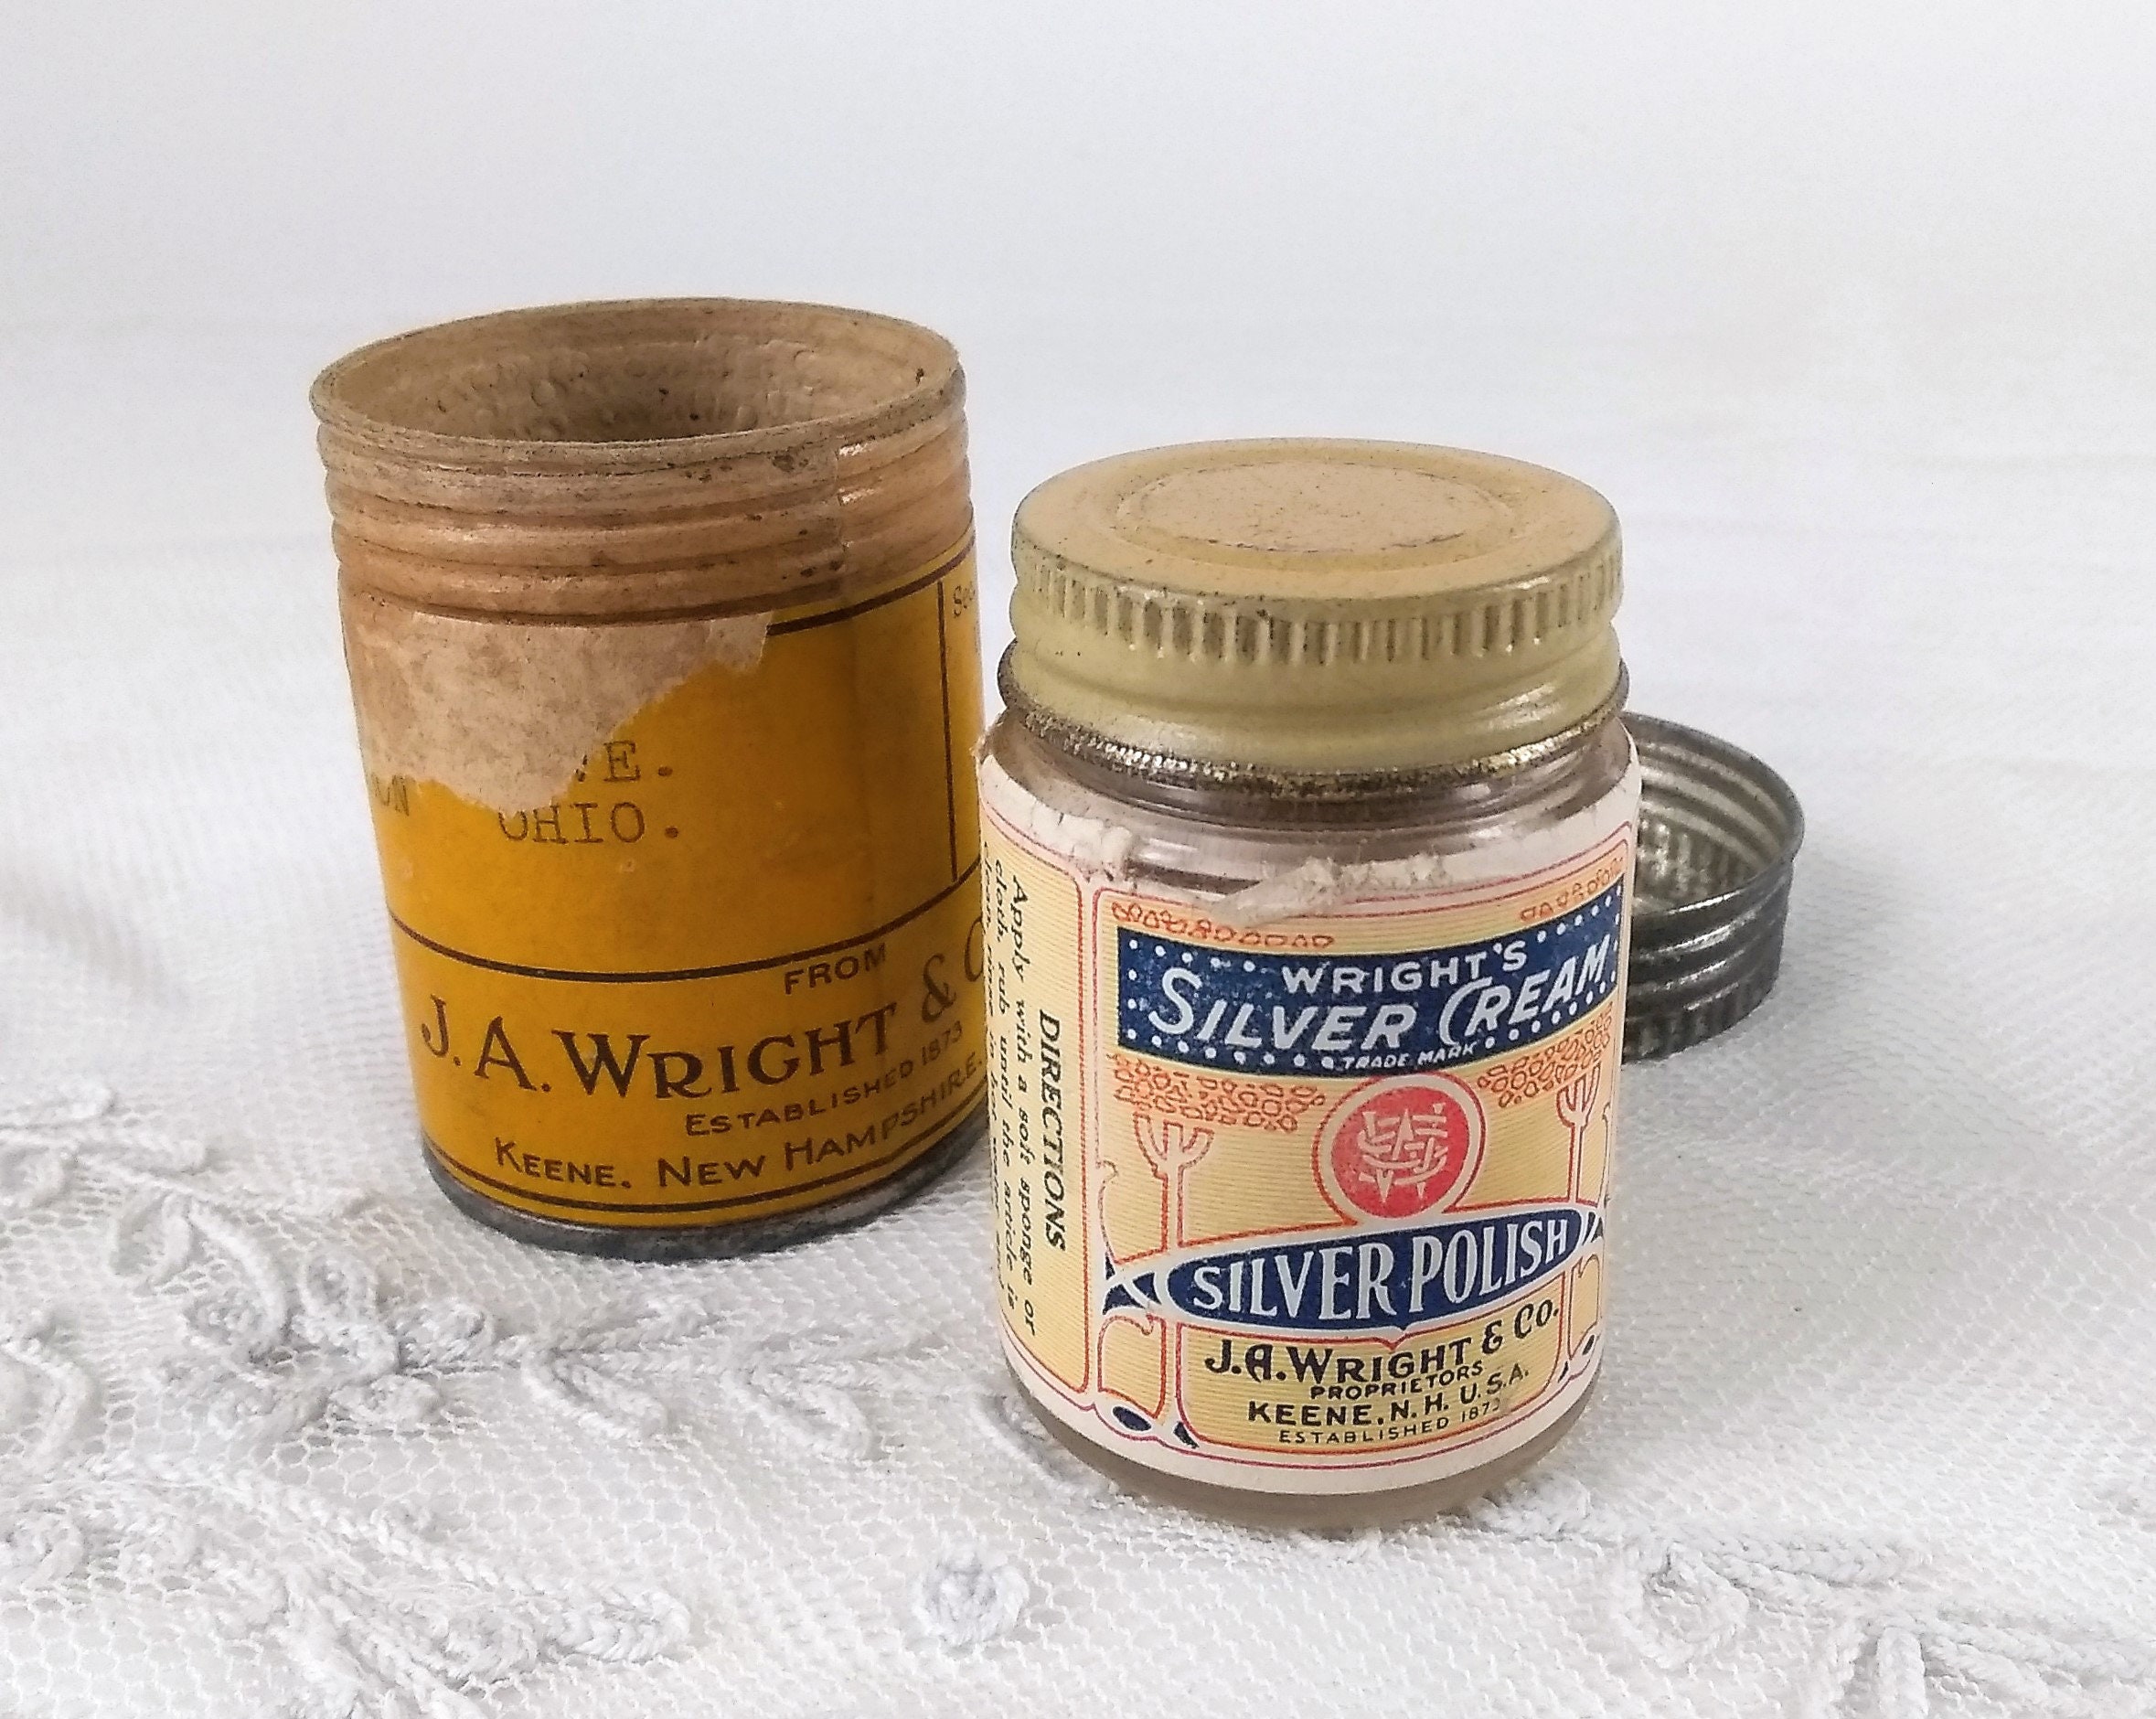 Wrights silver polish Archives - The Enchanted Home